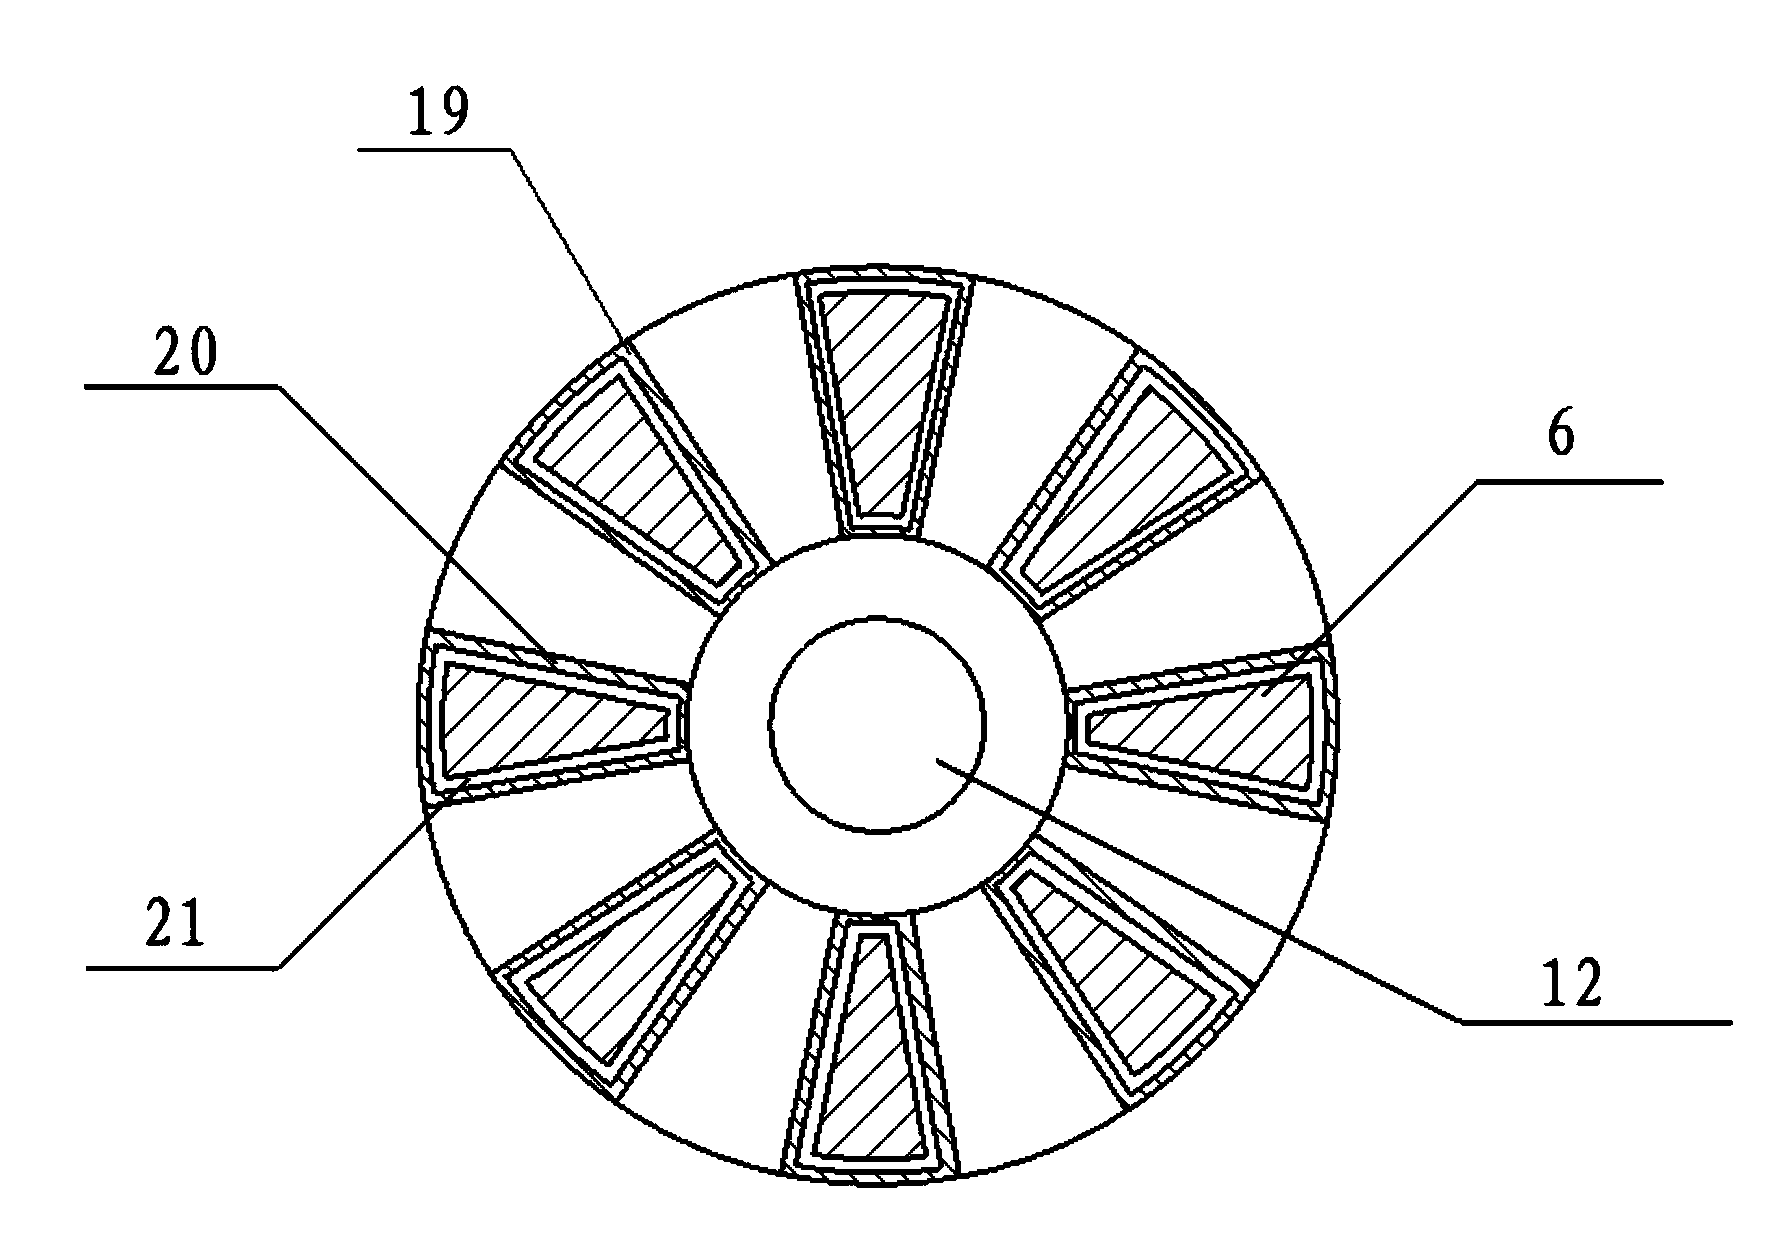 Drill bit capable of enabling well wall to be ceramic